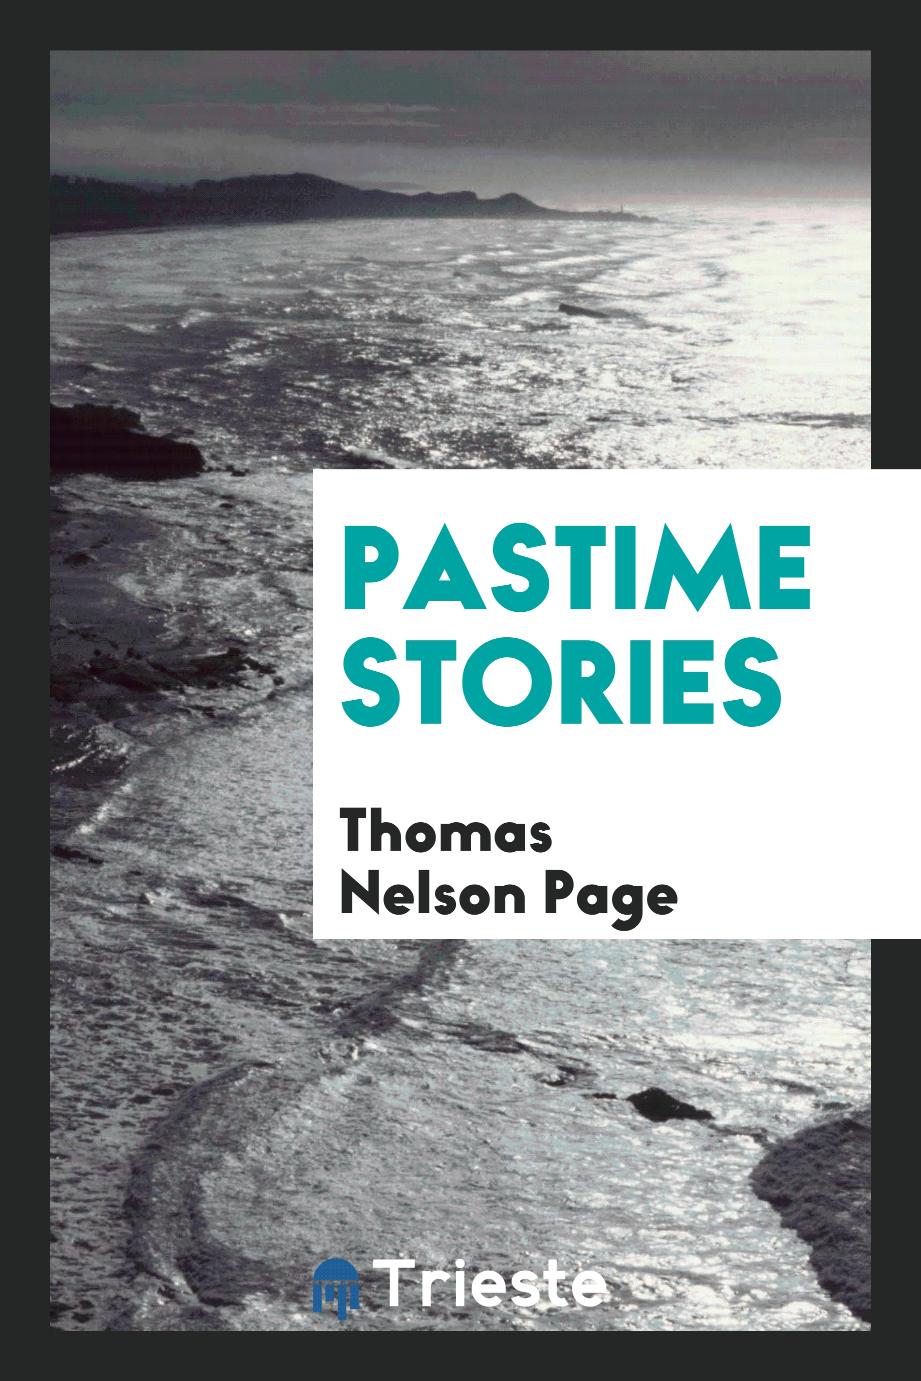 Pastime stories